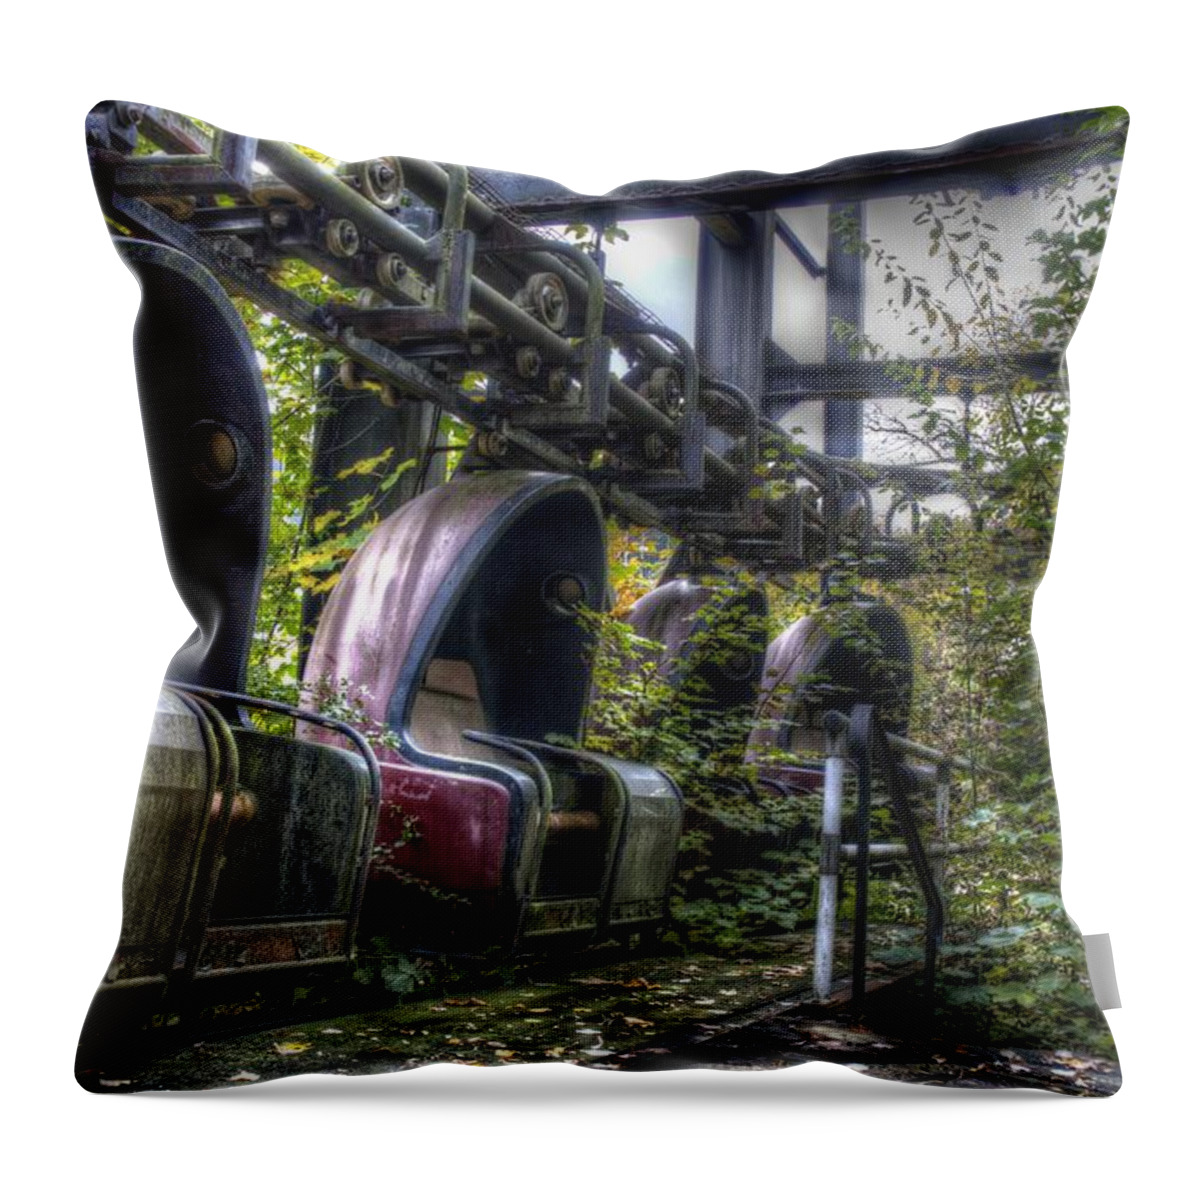 Berlin Throw Pillow featuring the digital art Ticket to ride by Nathan Wright